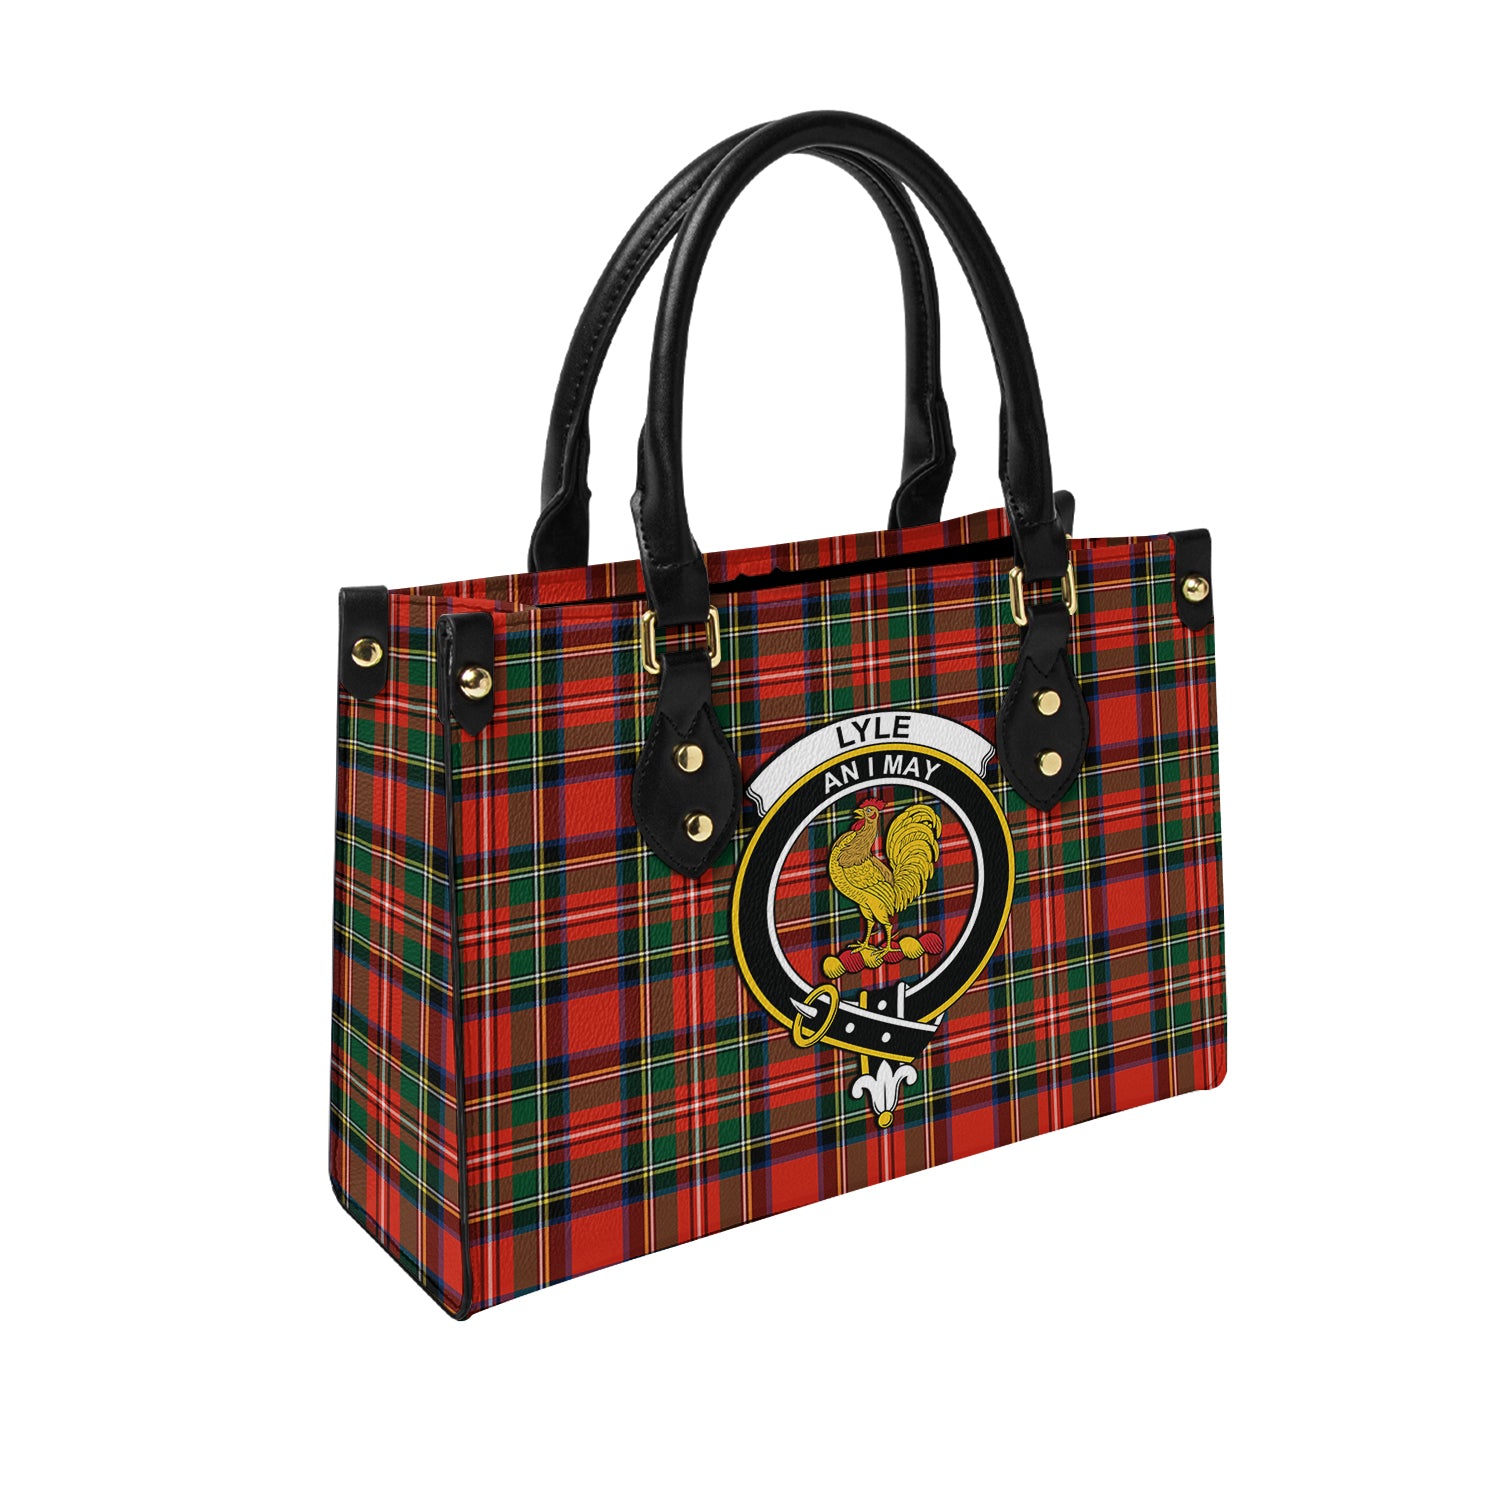 lyle-tartan-leather-bag-with-family-crest